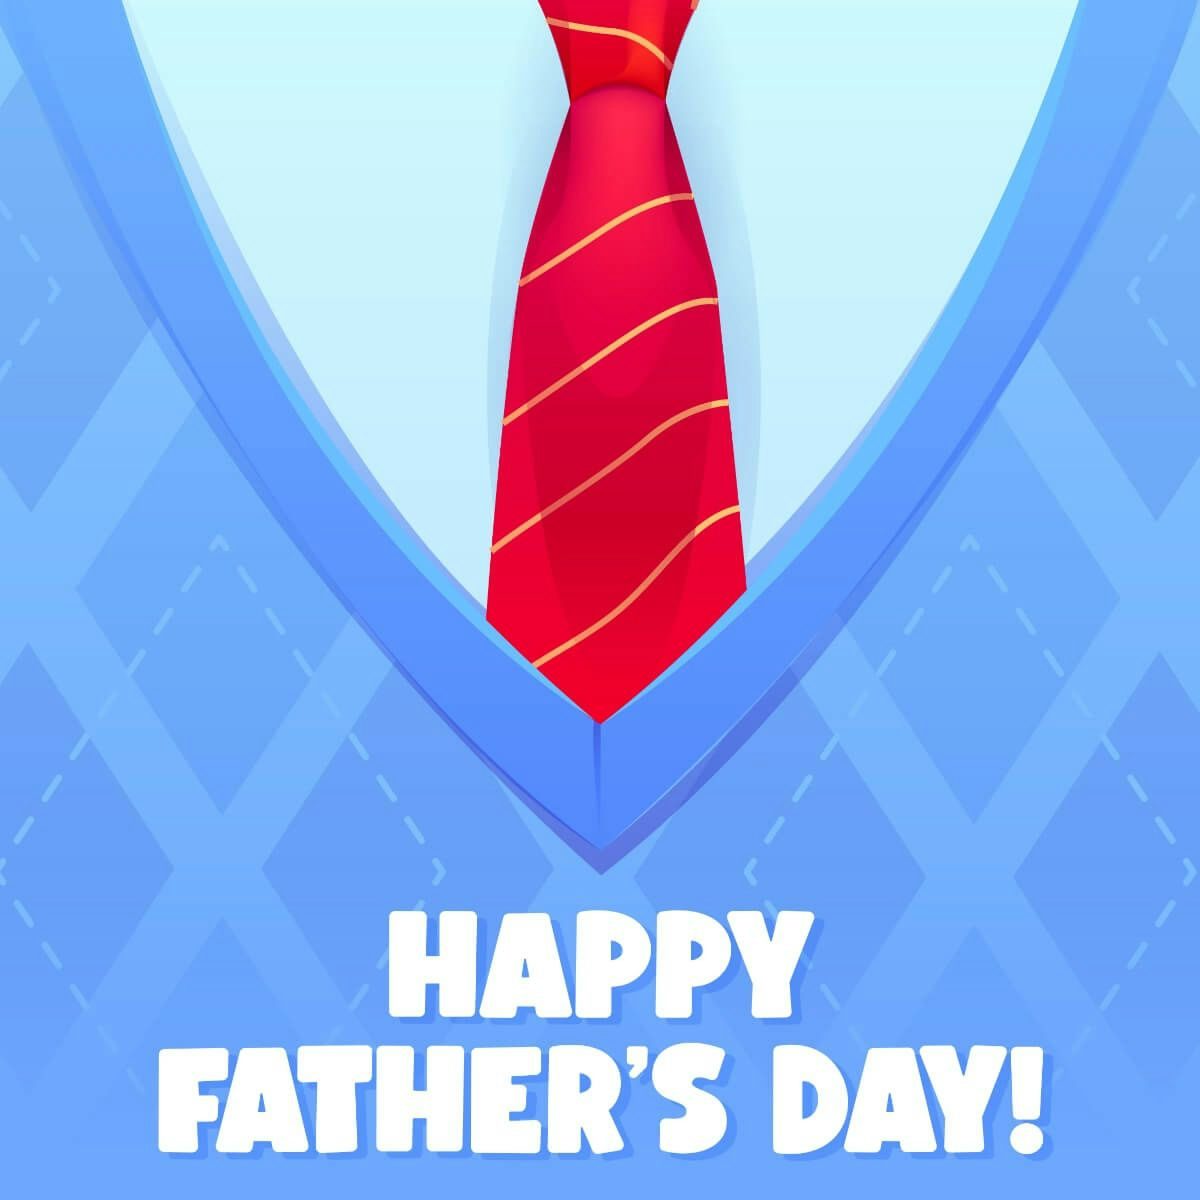 Card Happy Father's Day!